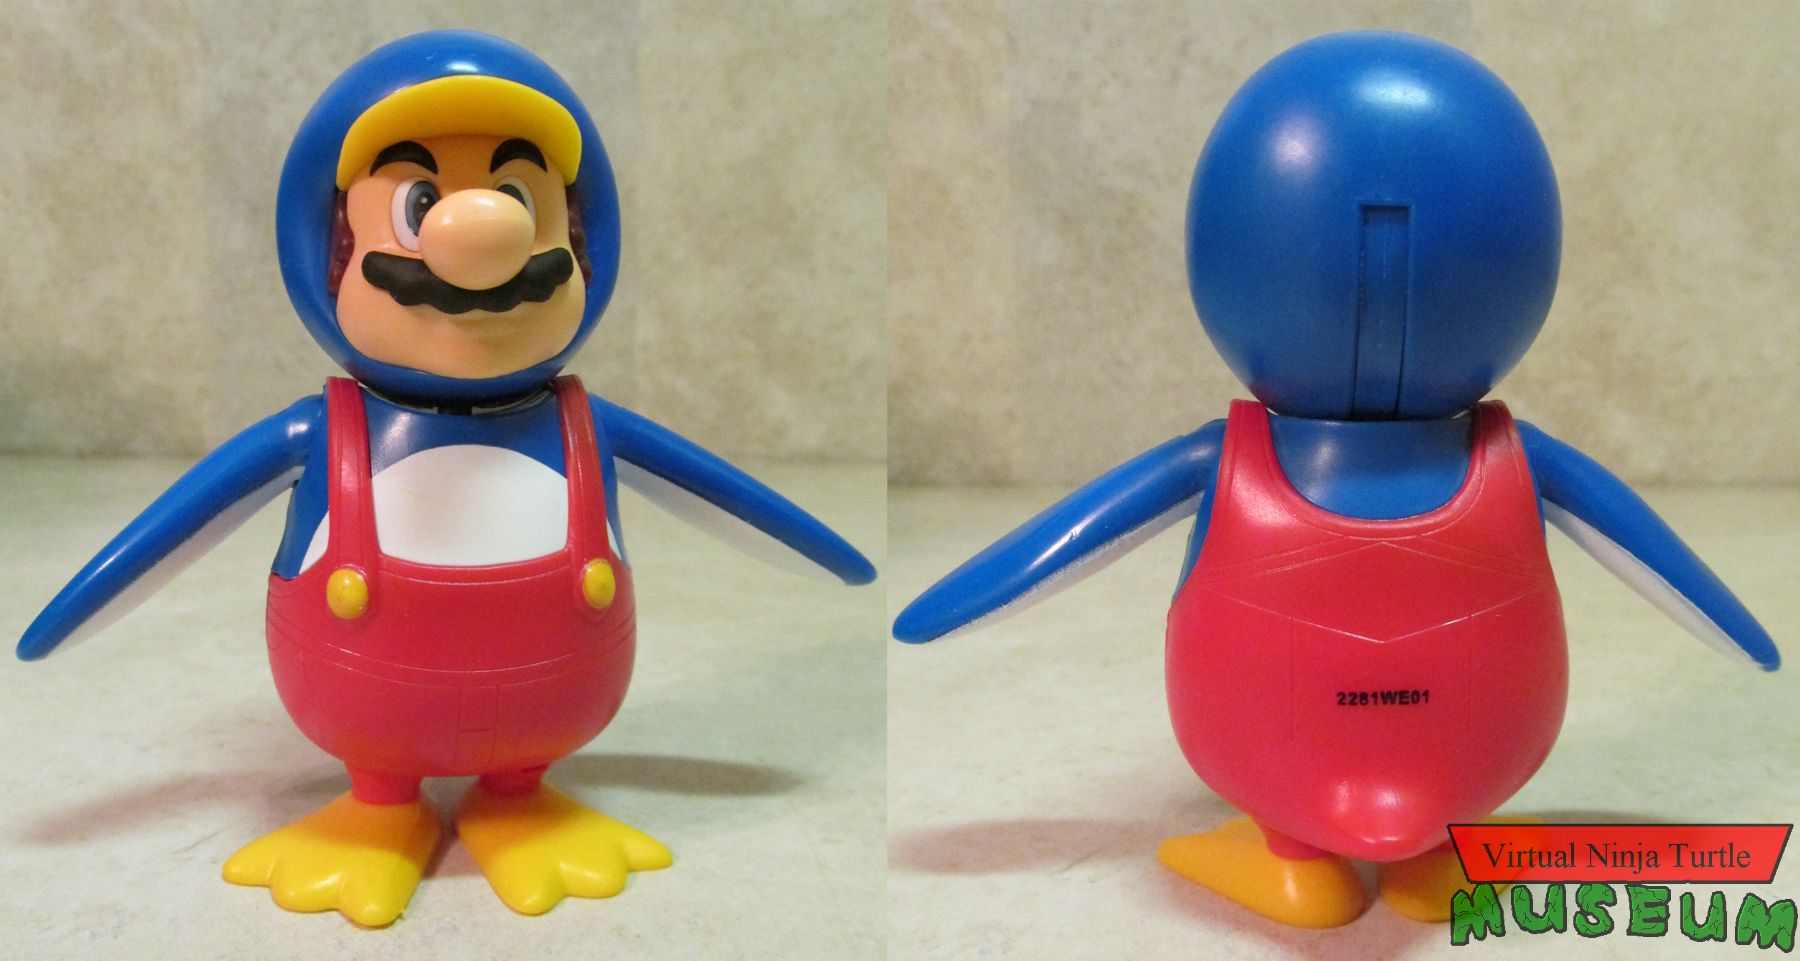 Penguin Mario front and back